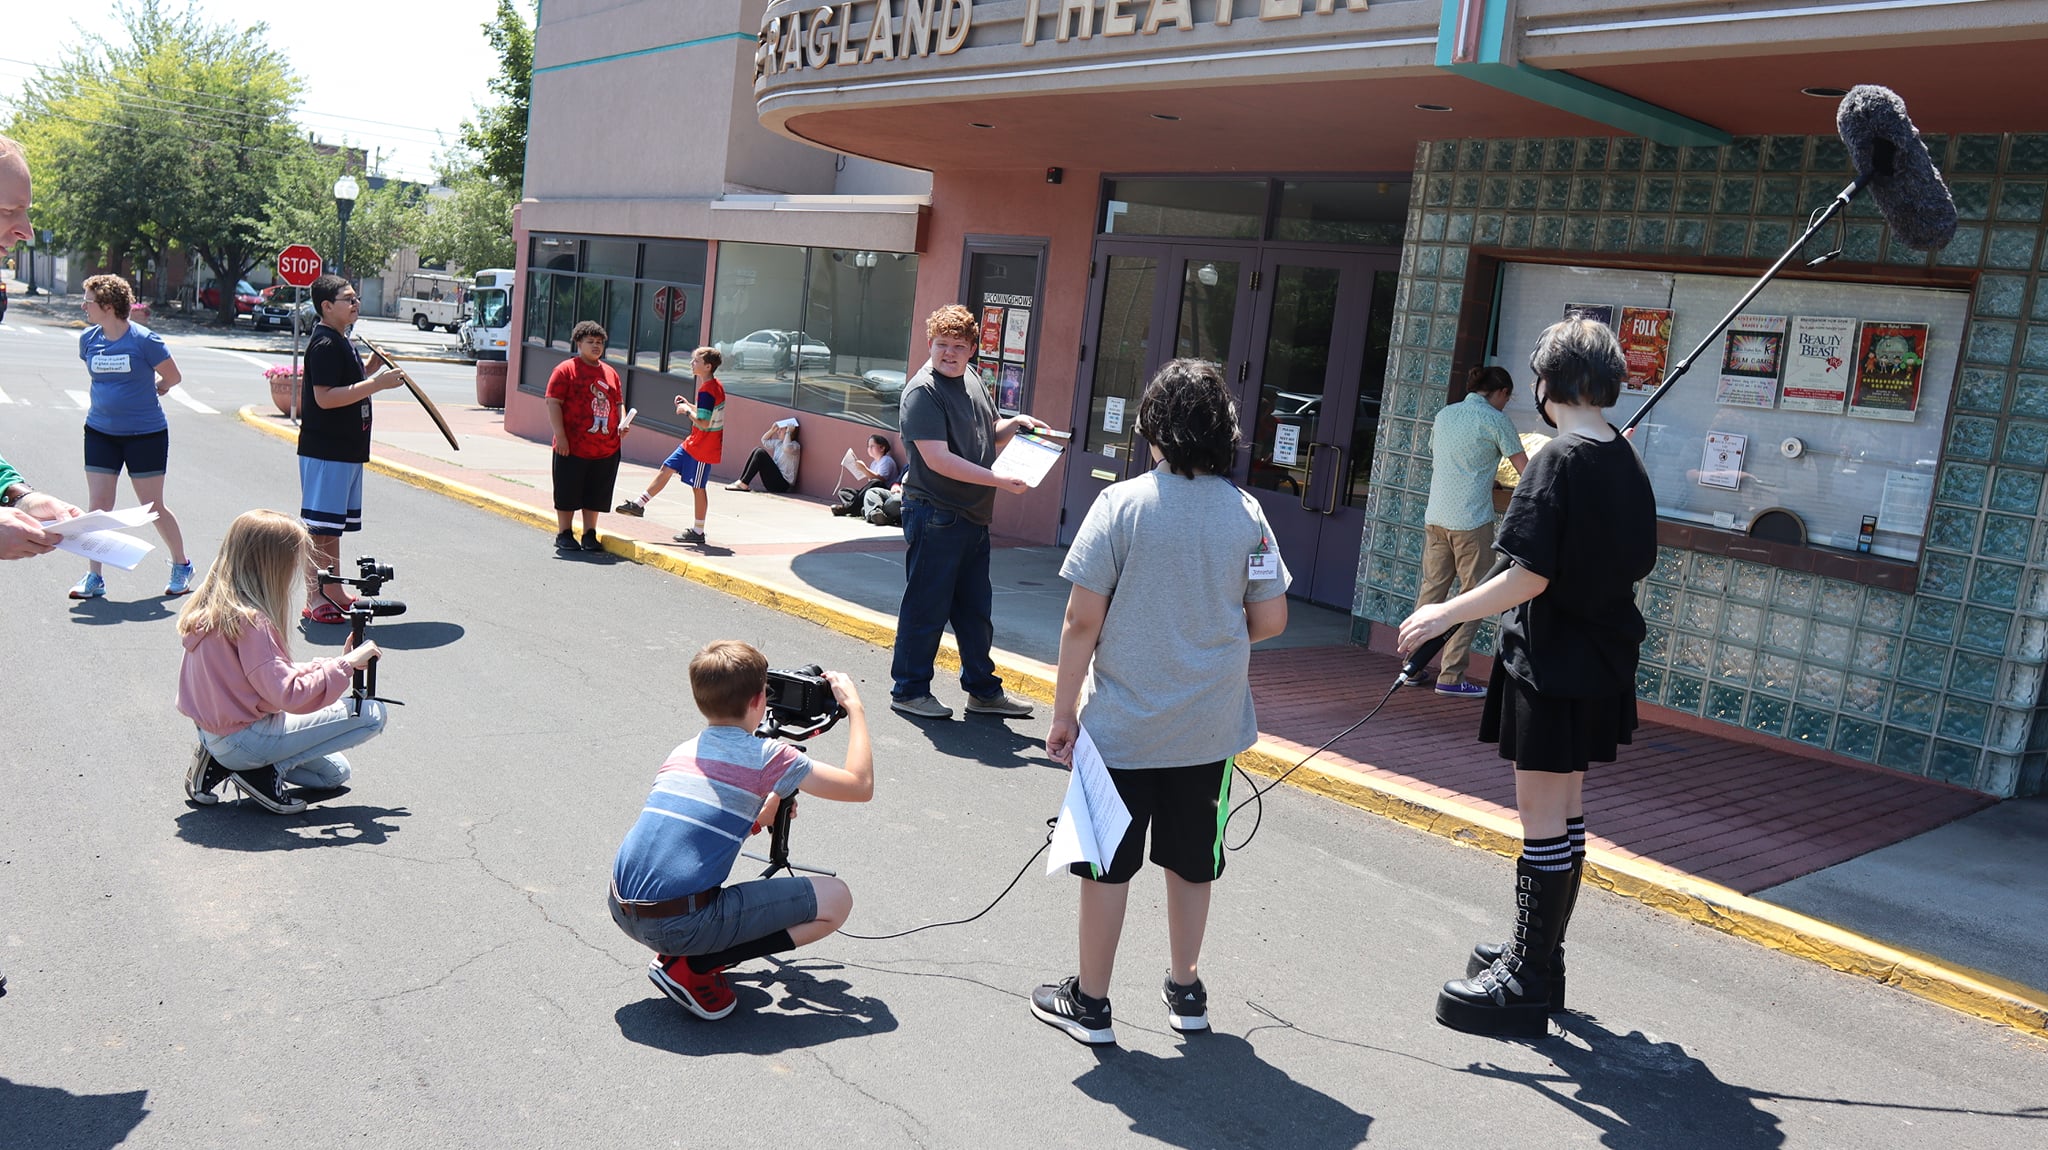 Klamath Film leads two student summer film camps